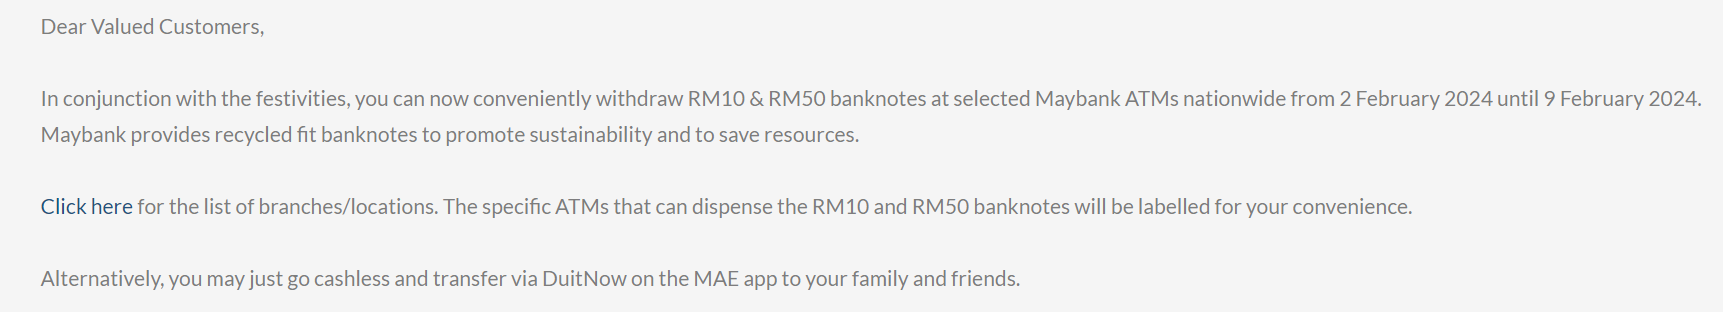 maybank-58-area-atm-new-cash